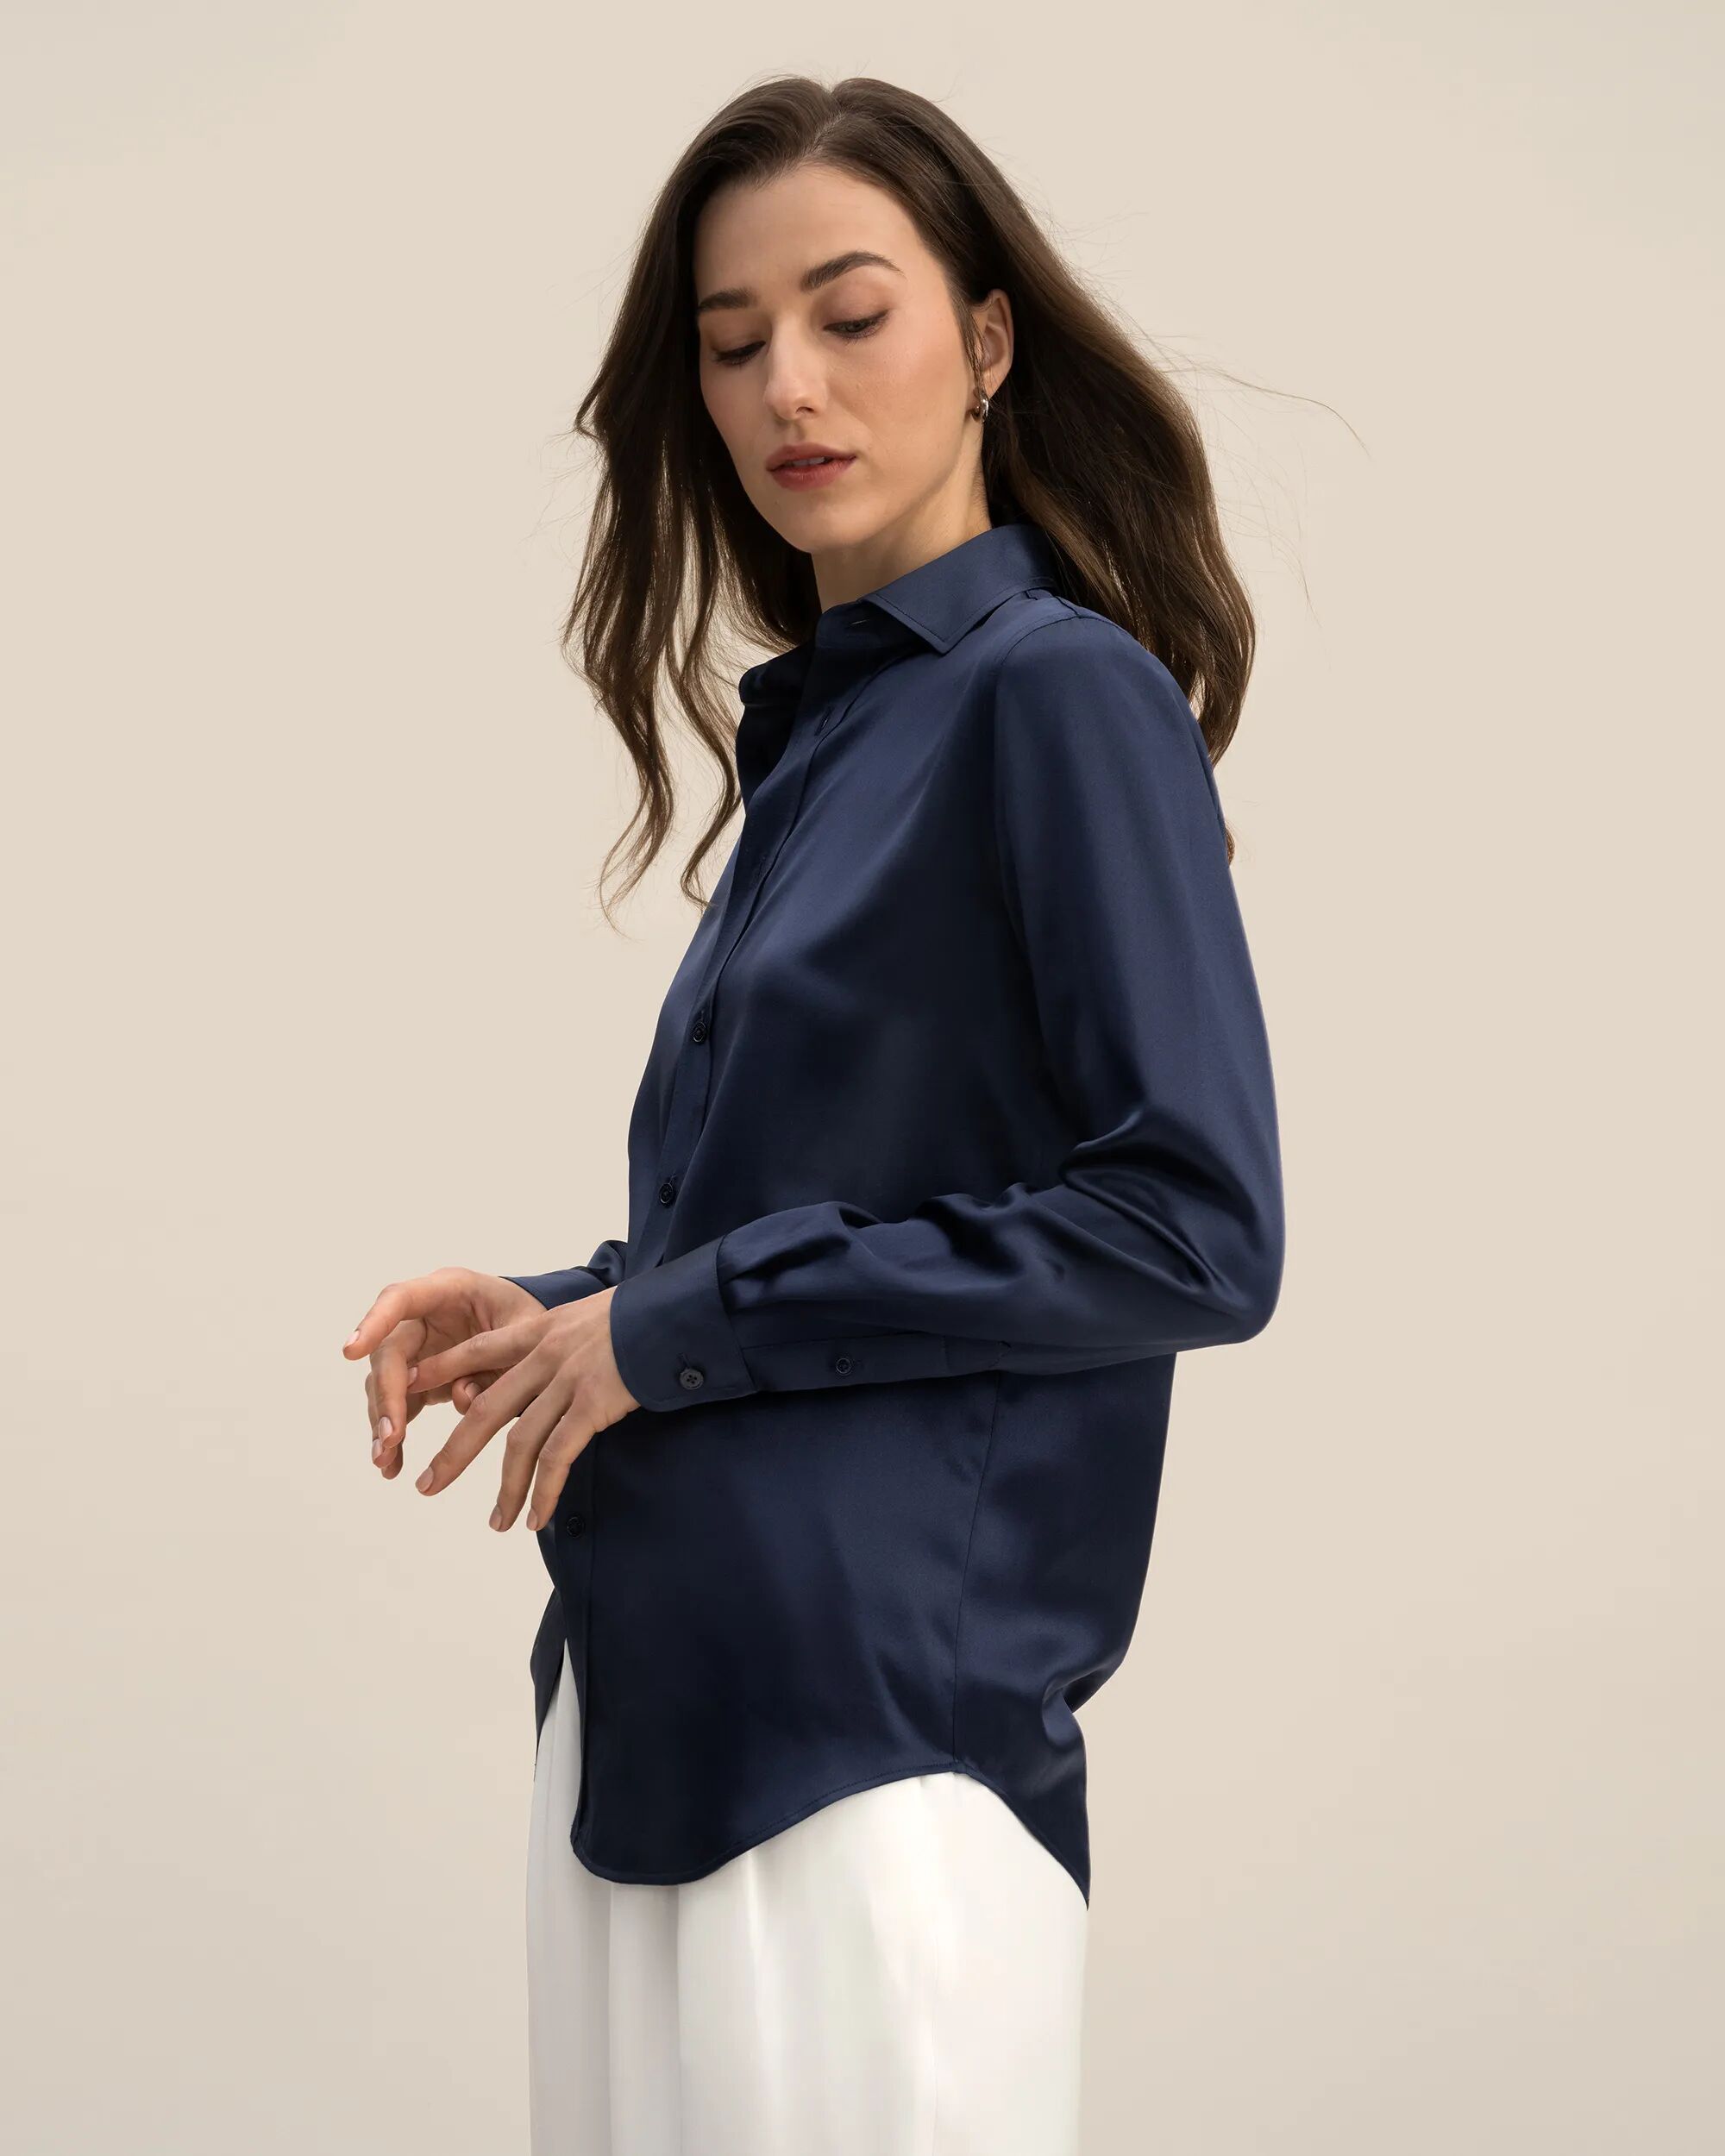 LILYSILK Business Blue Silk Shirt   Silk Solid Long Sleeves Style   Women Navy Silk Glossy Basic Collar Perfect For Work And Leisurewear 4